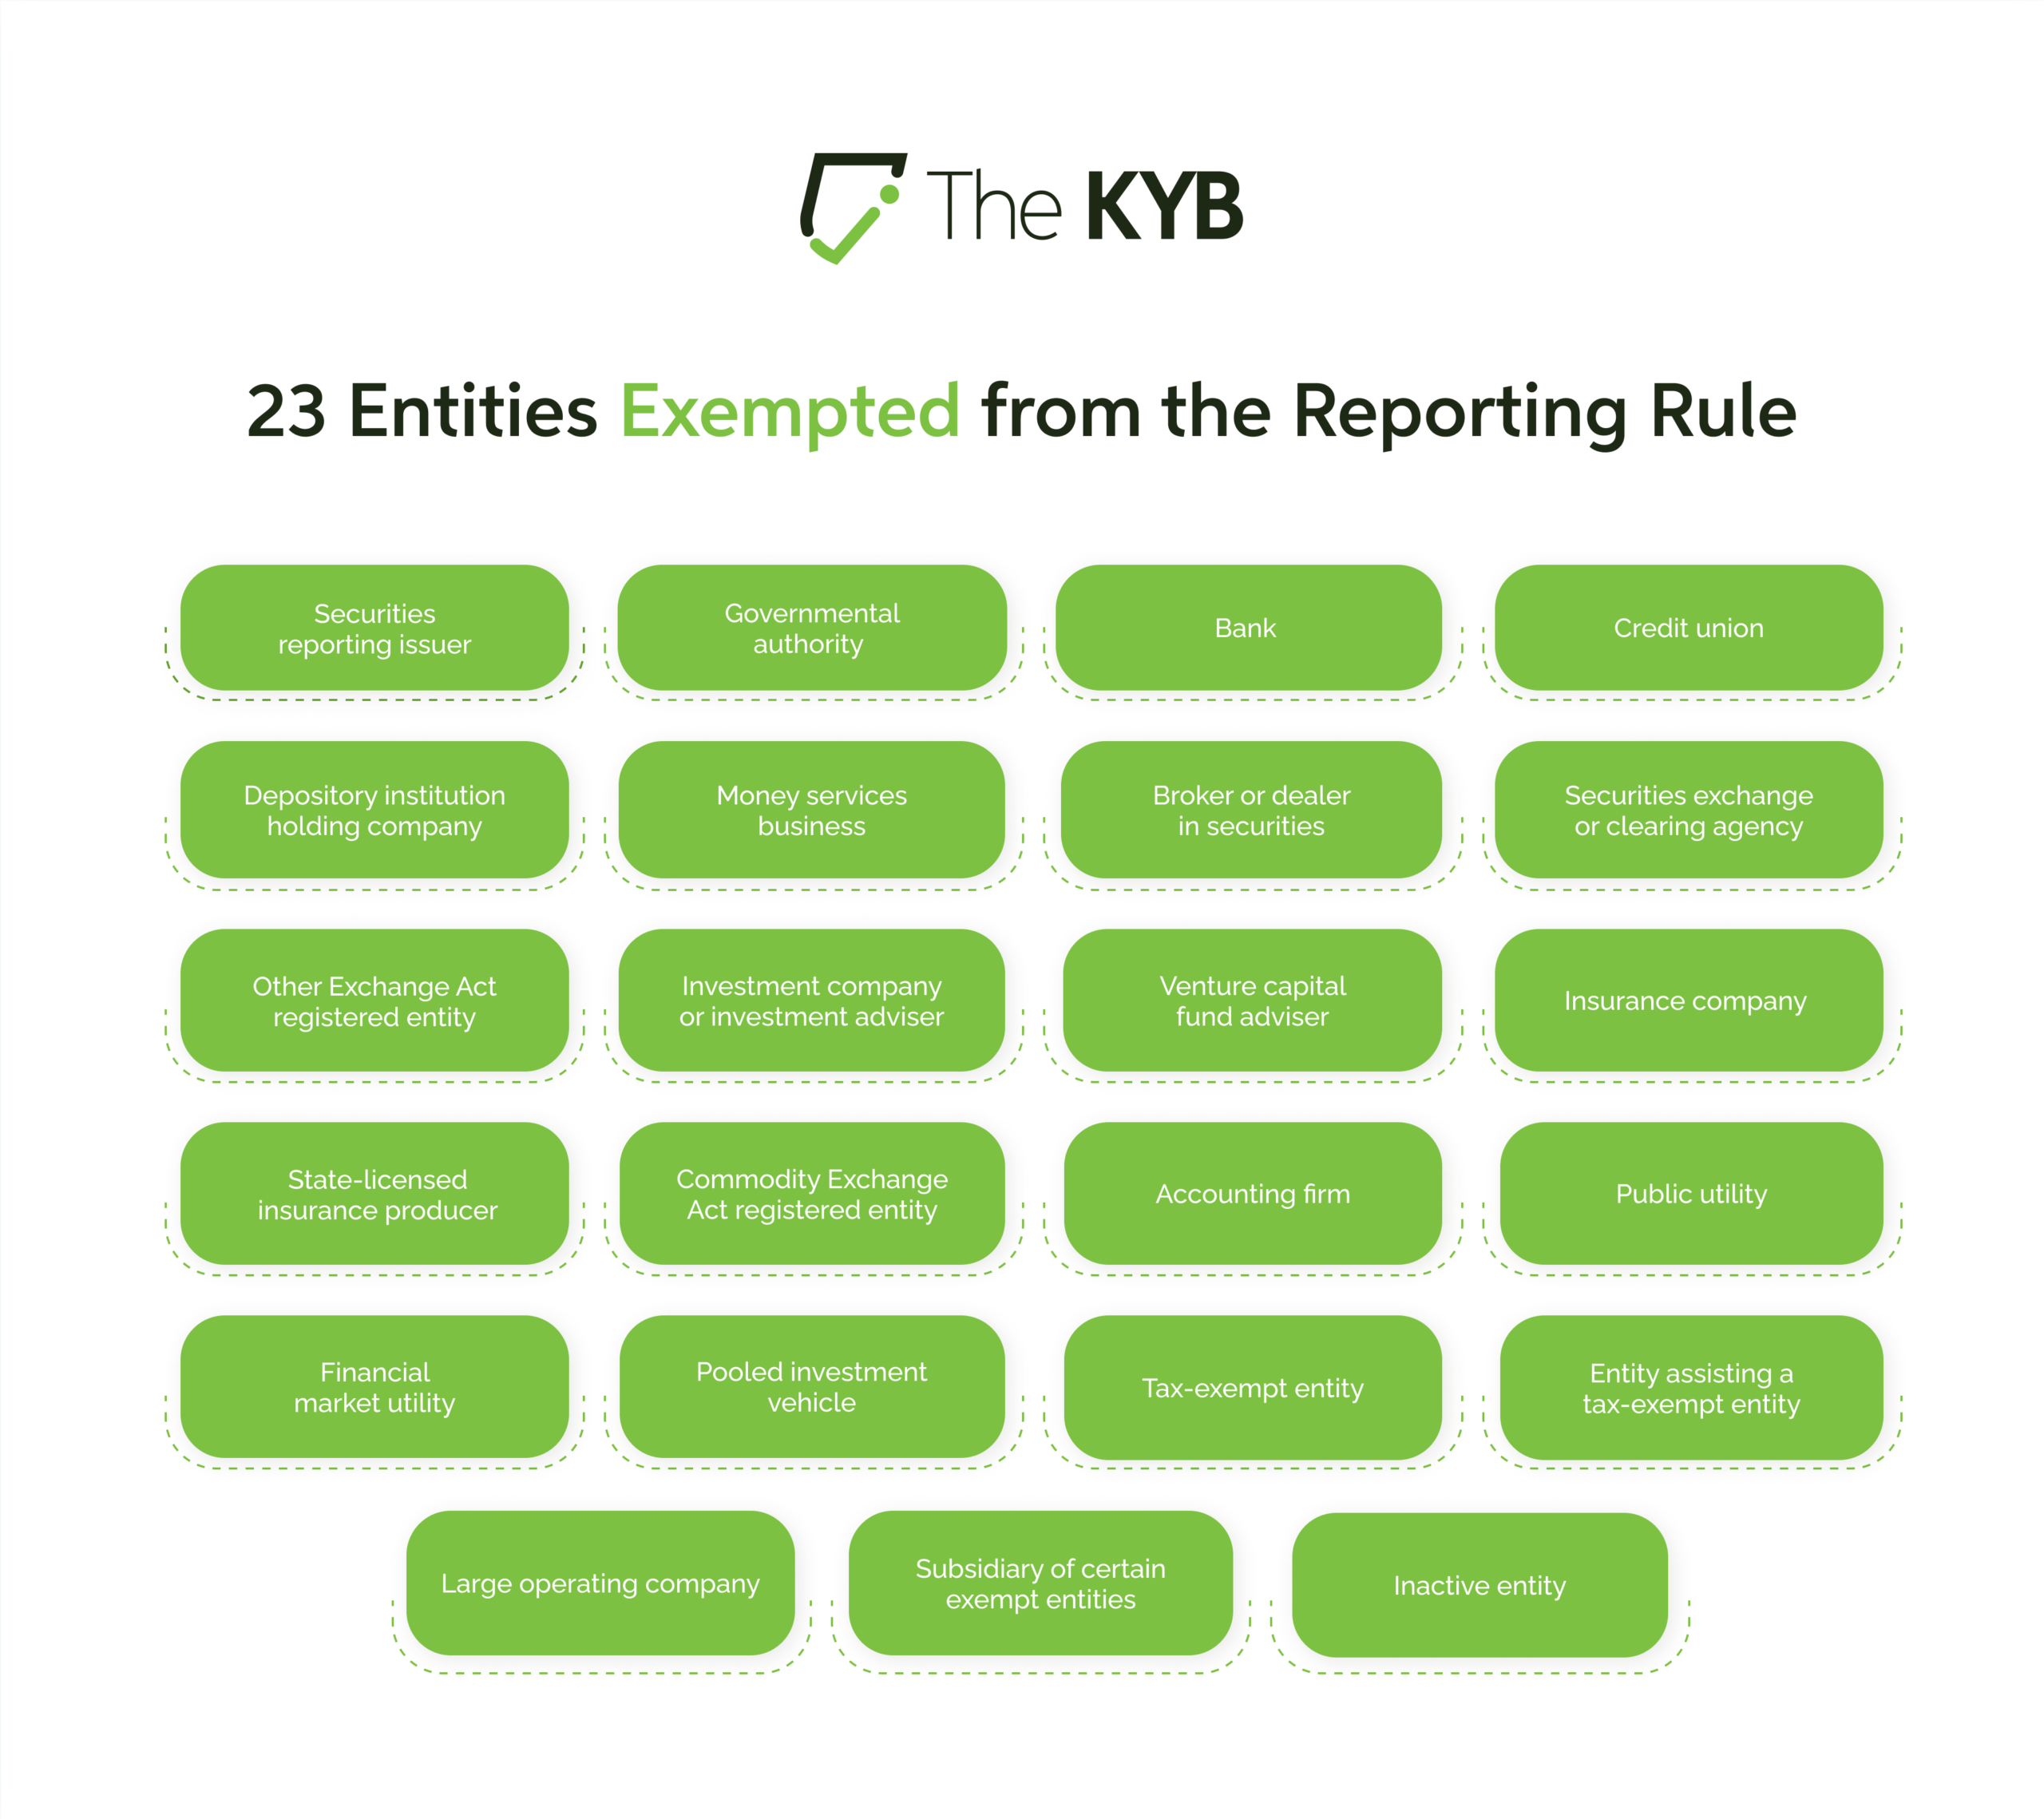 23 Entities Exempted from the Reporting Rule